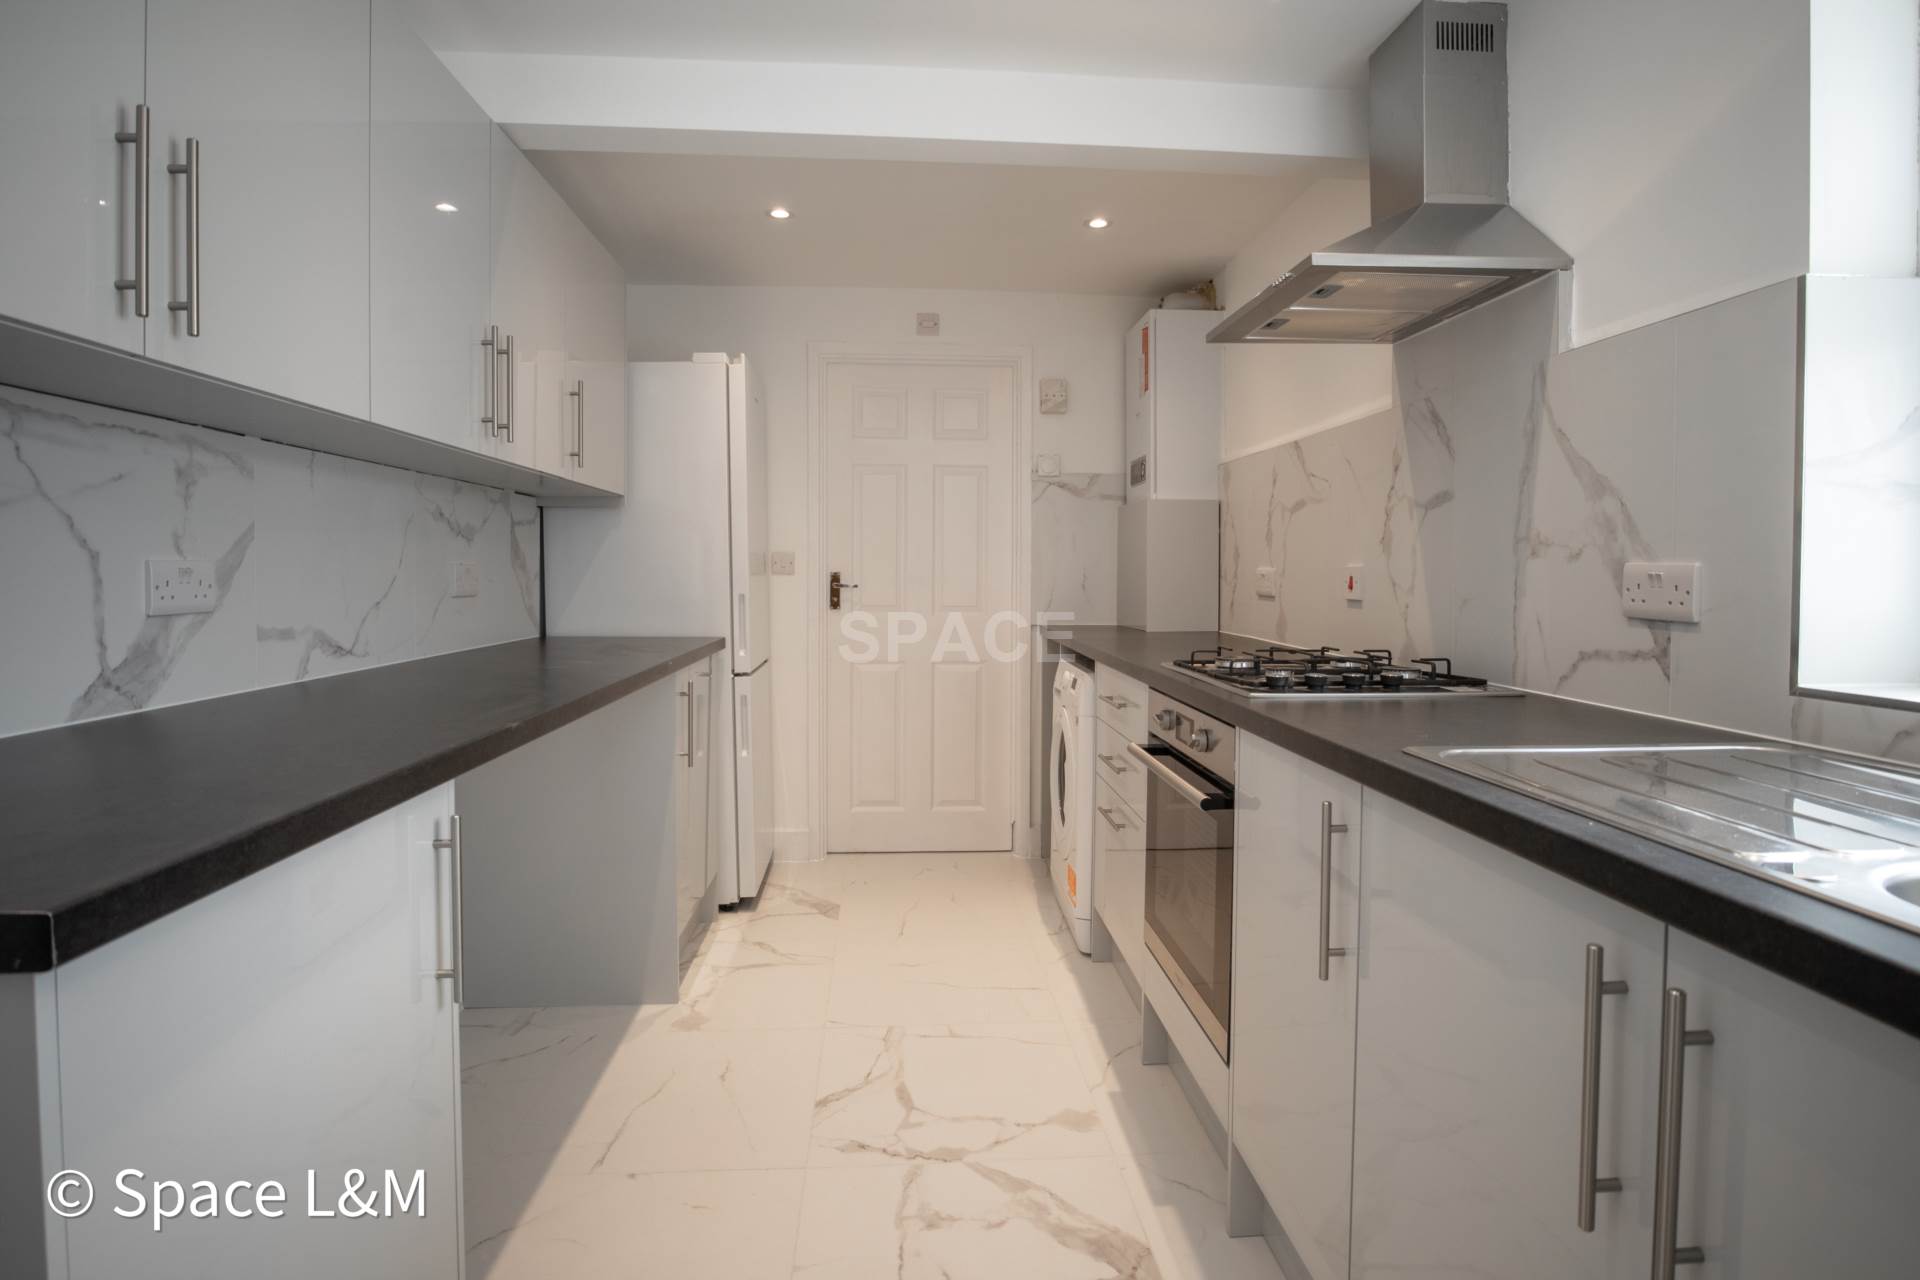 4 bed Mid Terraced House for rent in Reading. From Space